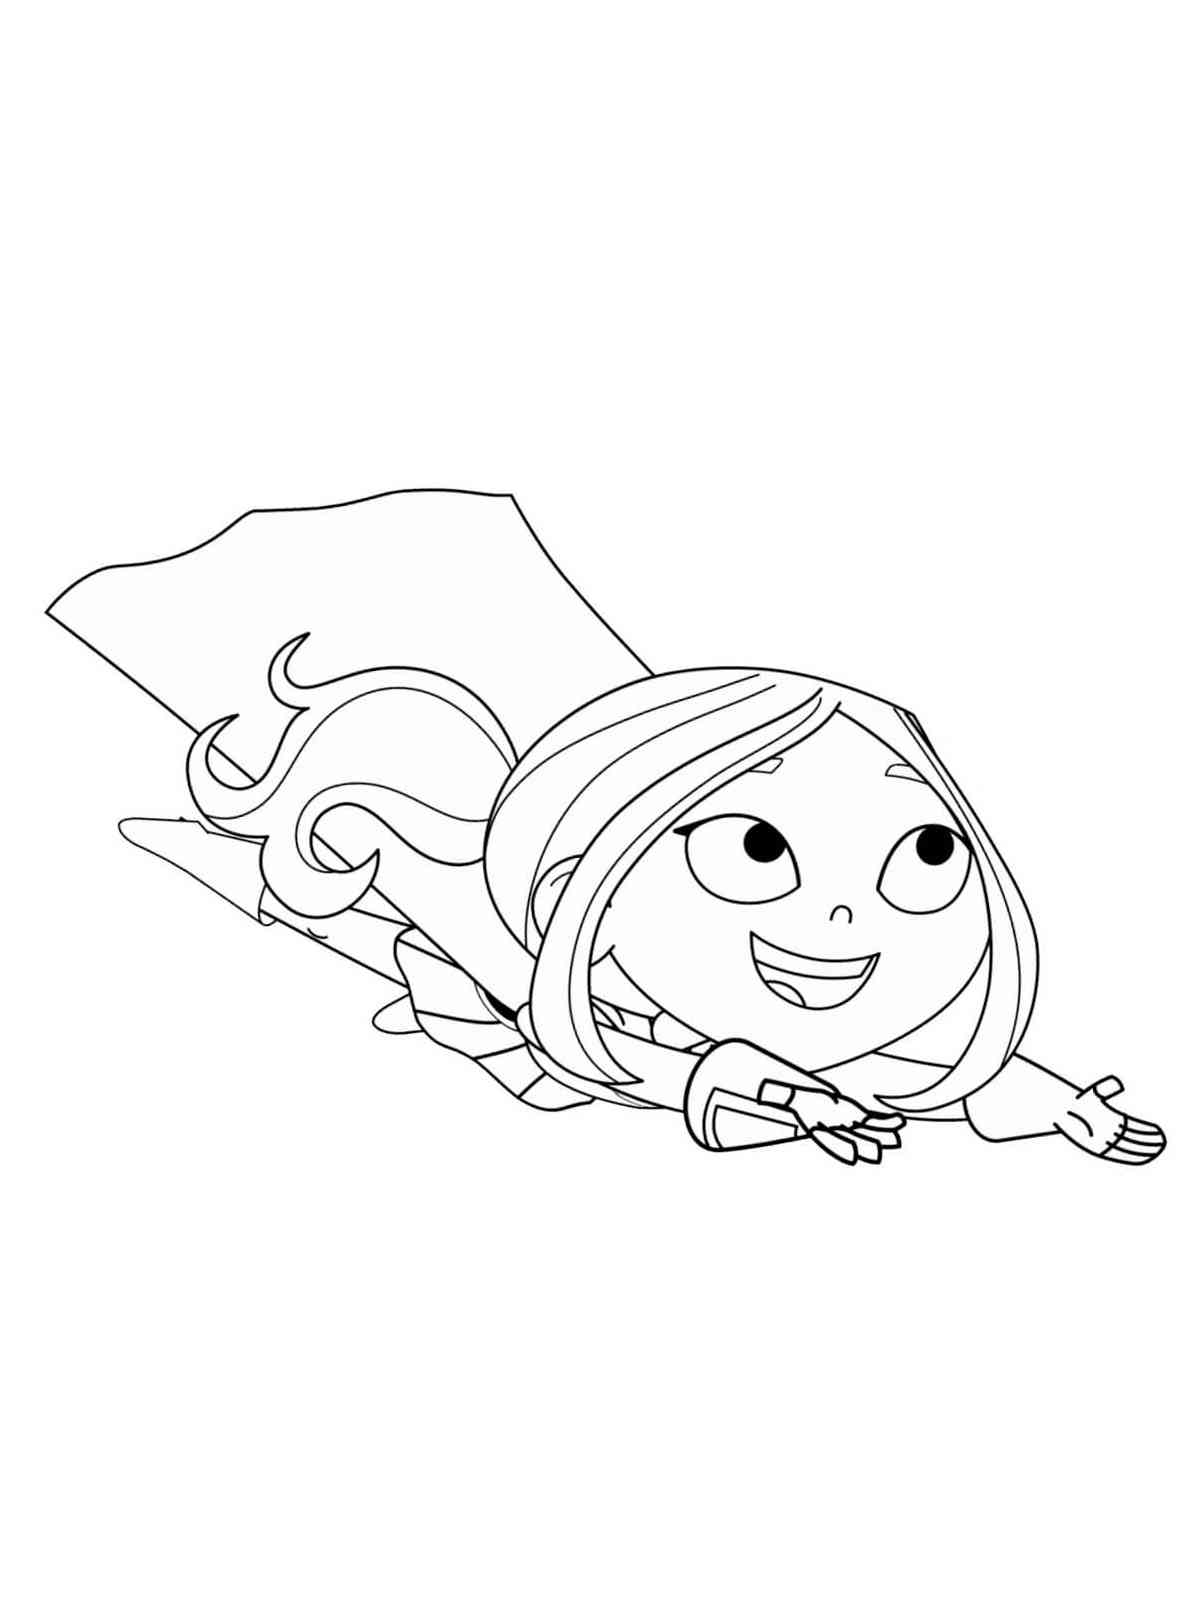 Hero Elementary 8 coloring page